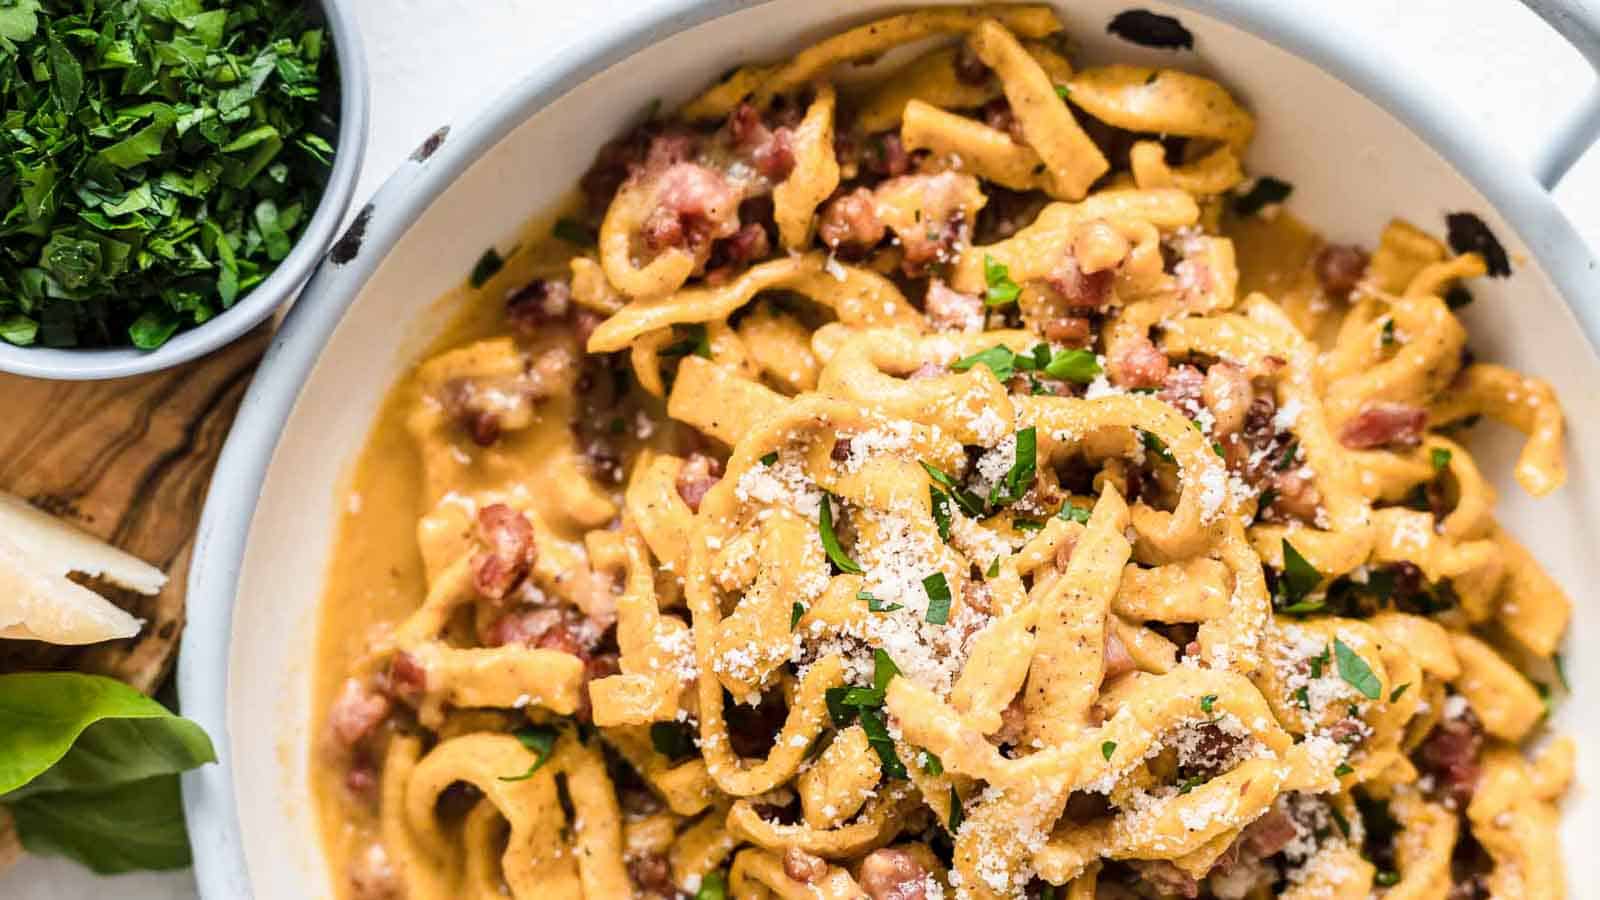 Pasta Carbonara inside a bowl with herbs and bacon.